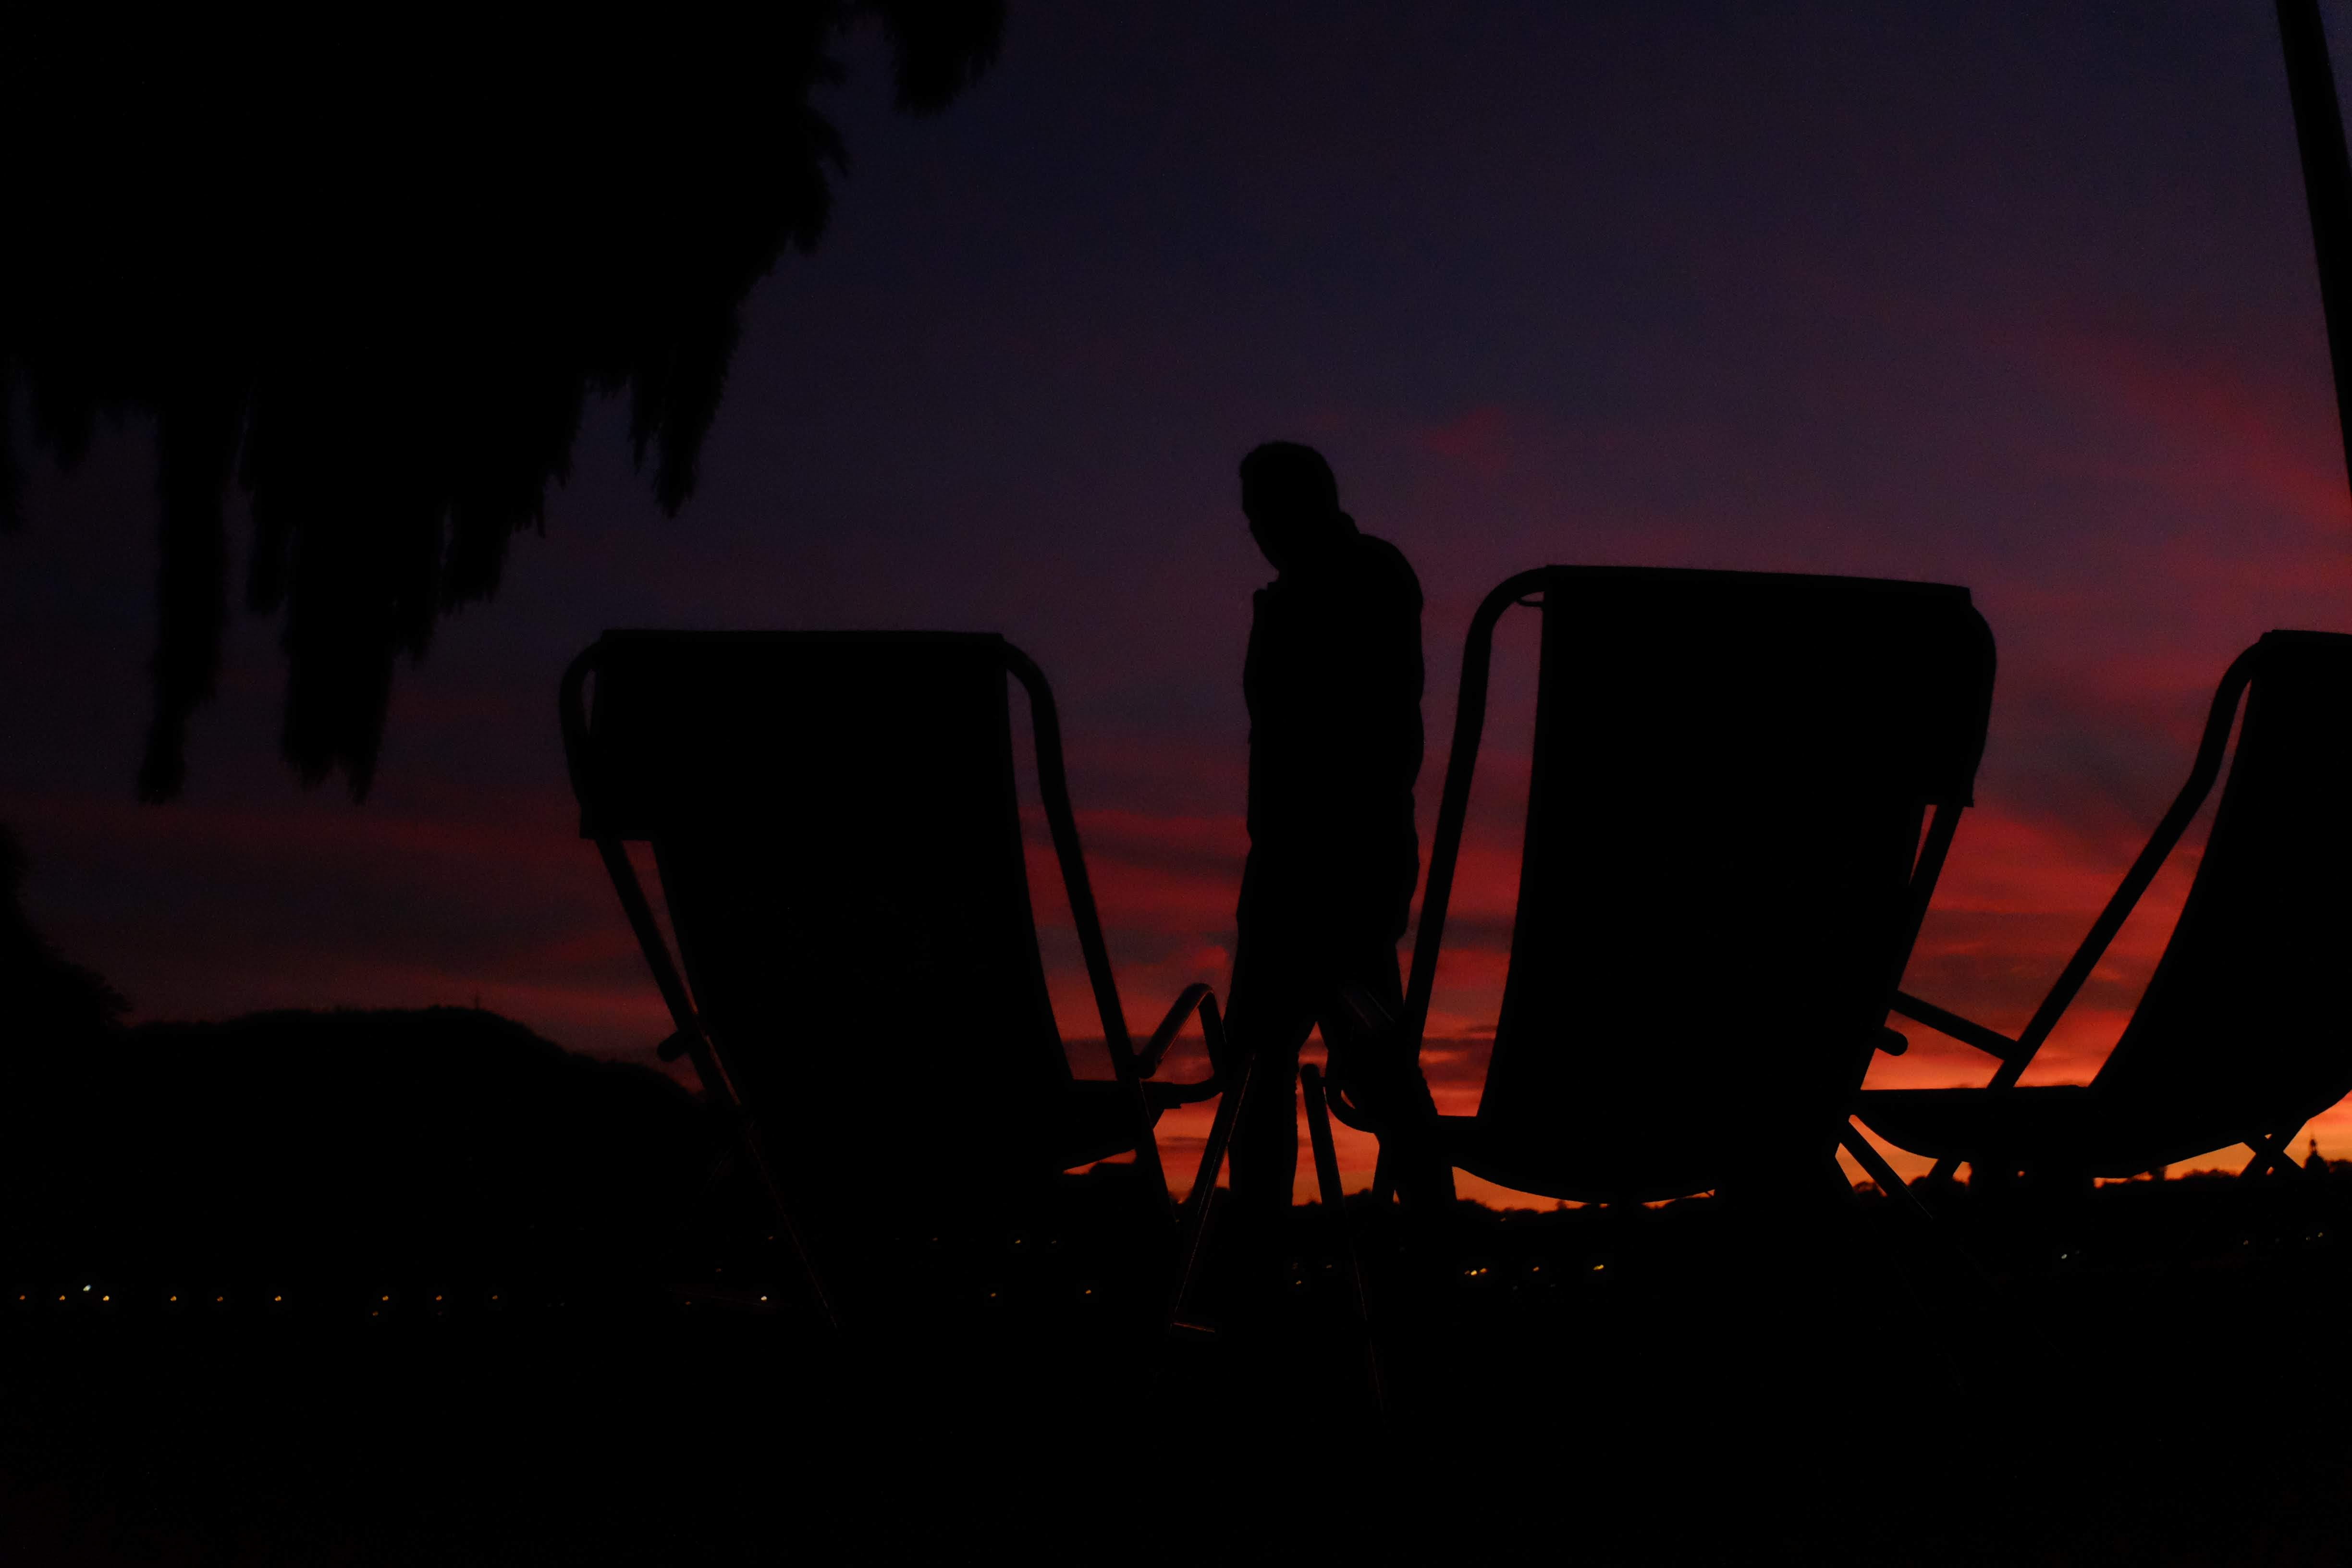 sunset, look, man, dark, chill, chairs, watch, invite, come